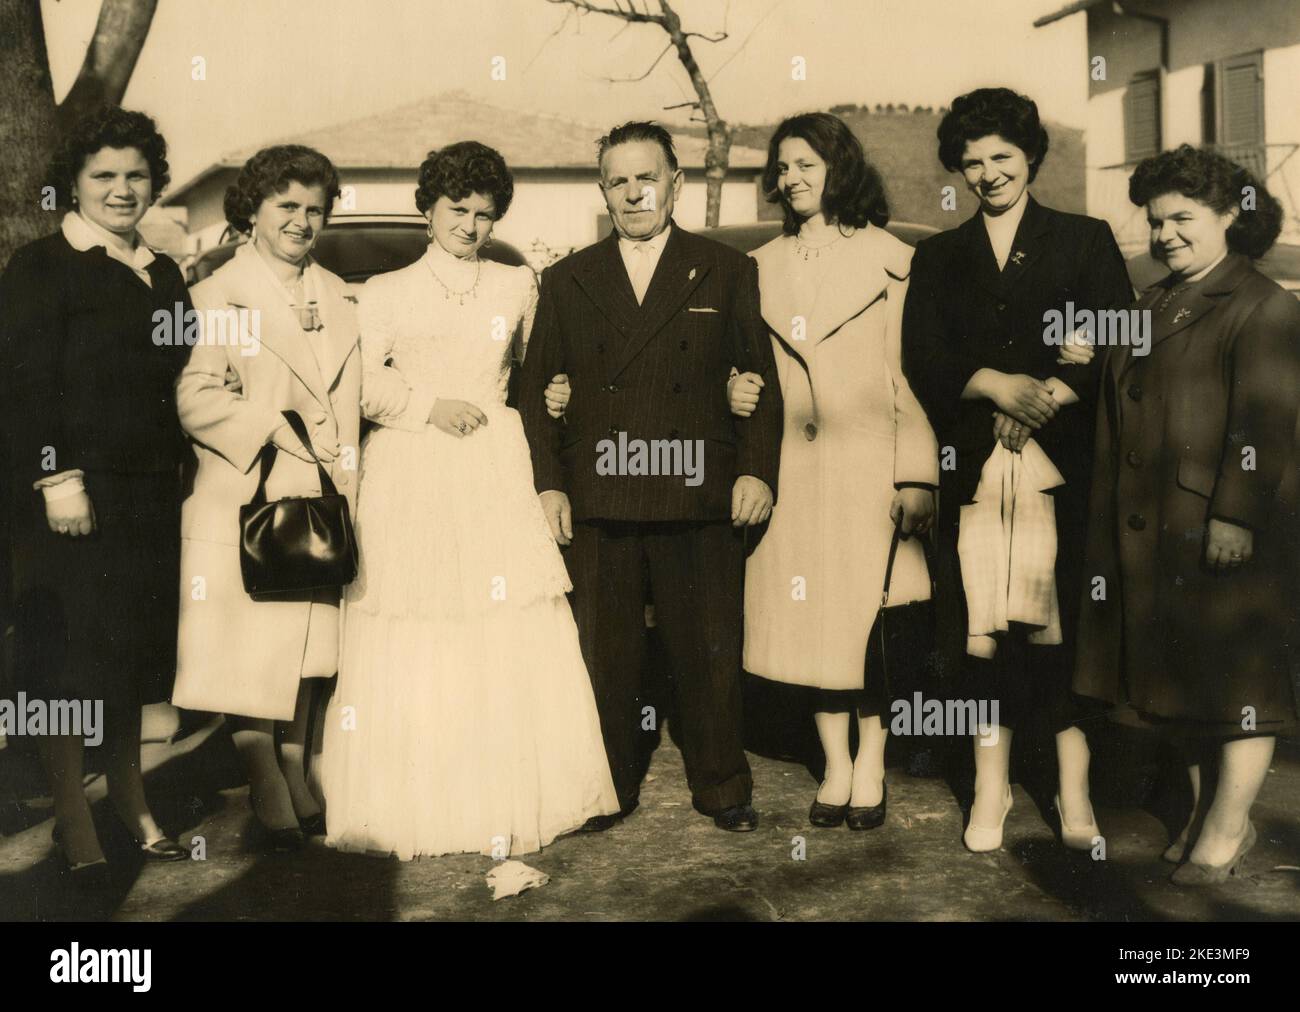 Wedding in a village in central Italy: The Bride taking photos outside with friends and relatives, 1950s Stock Photo